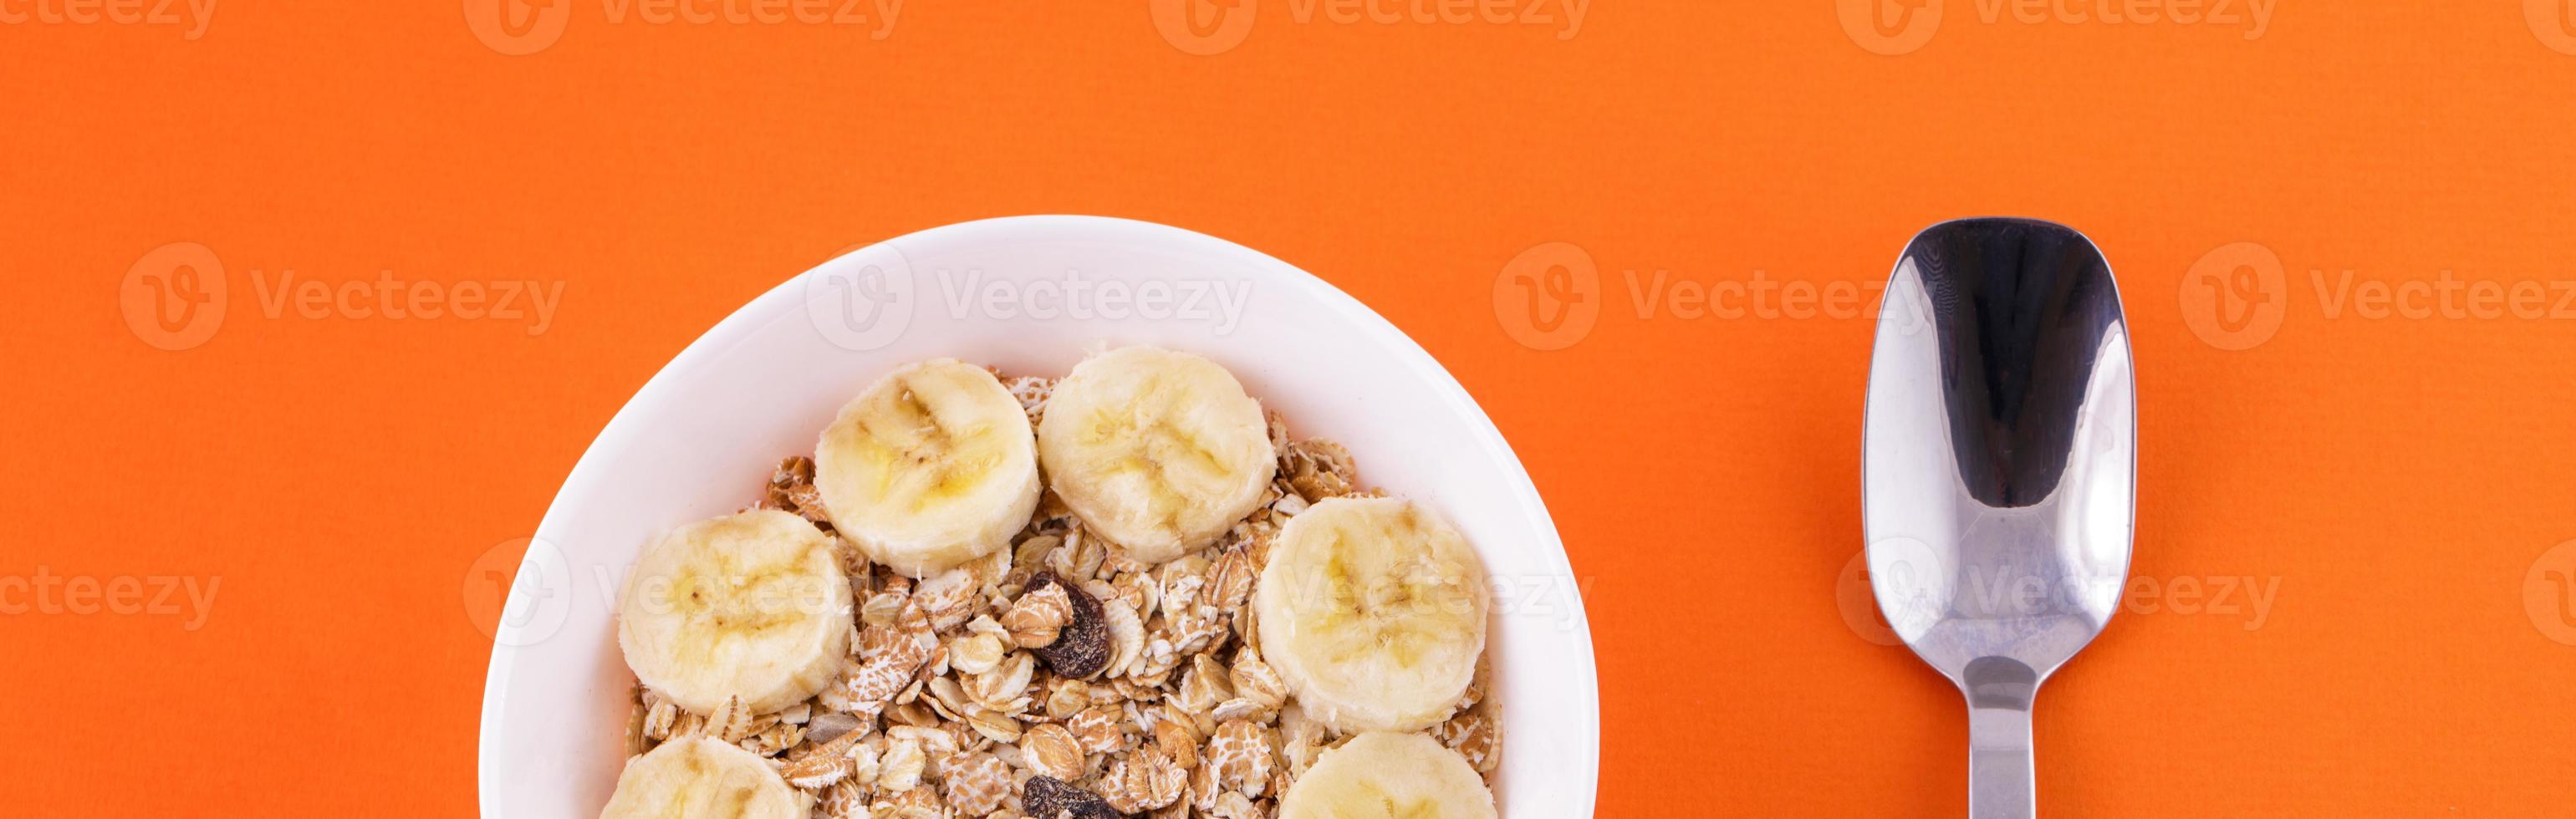 oatmeal in a plate with a banana and a spoon on an orange background photo